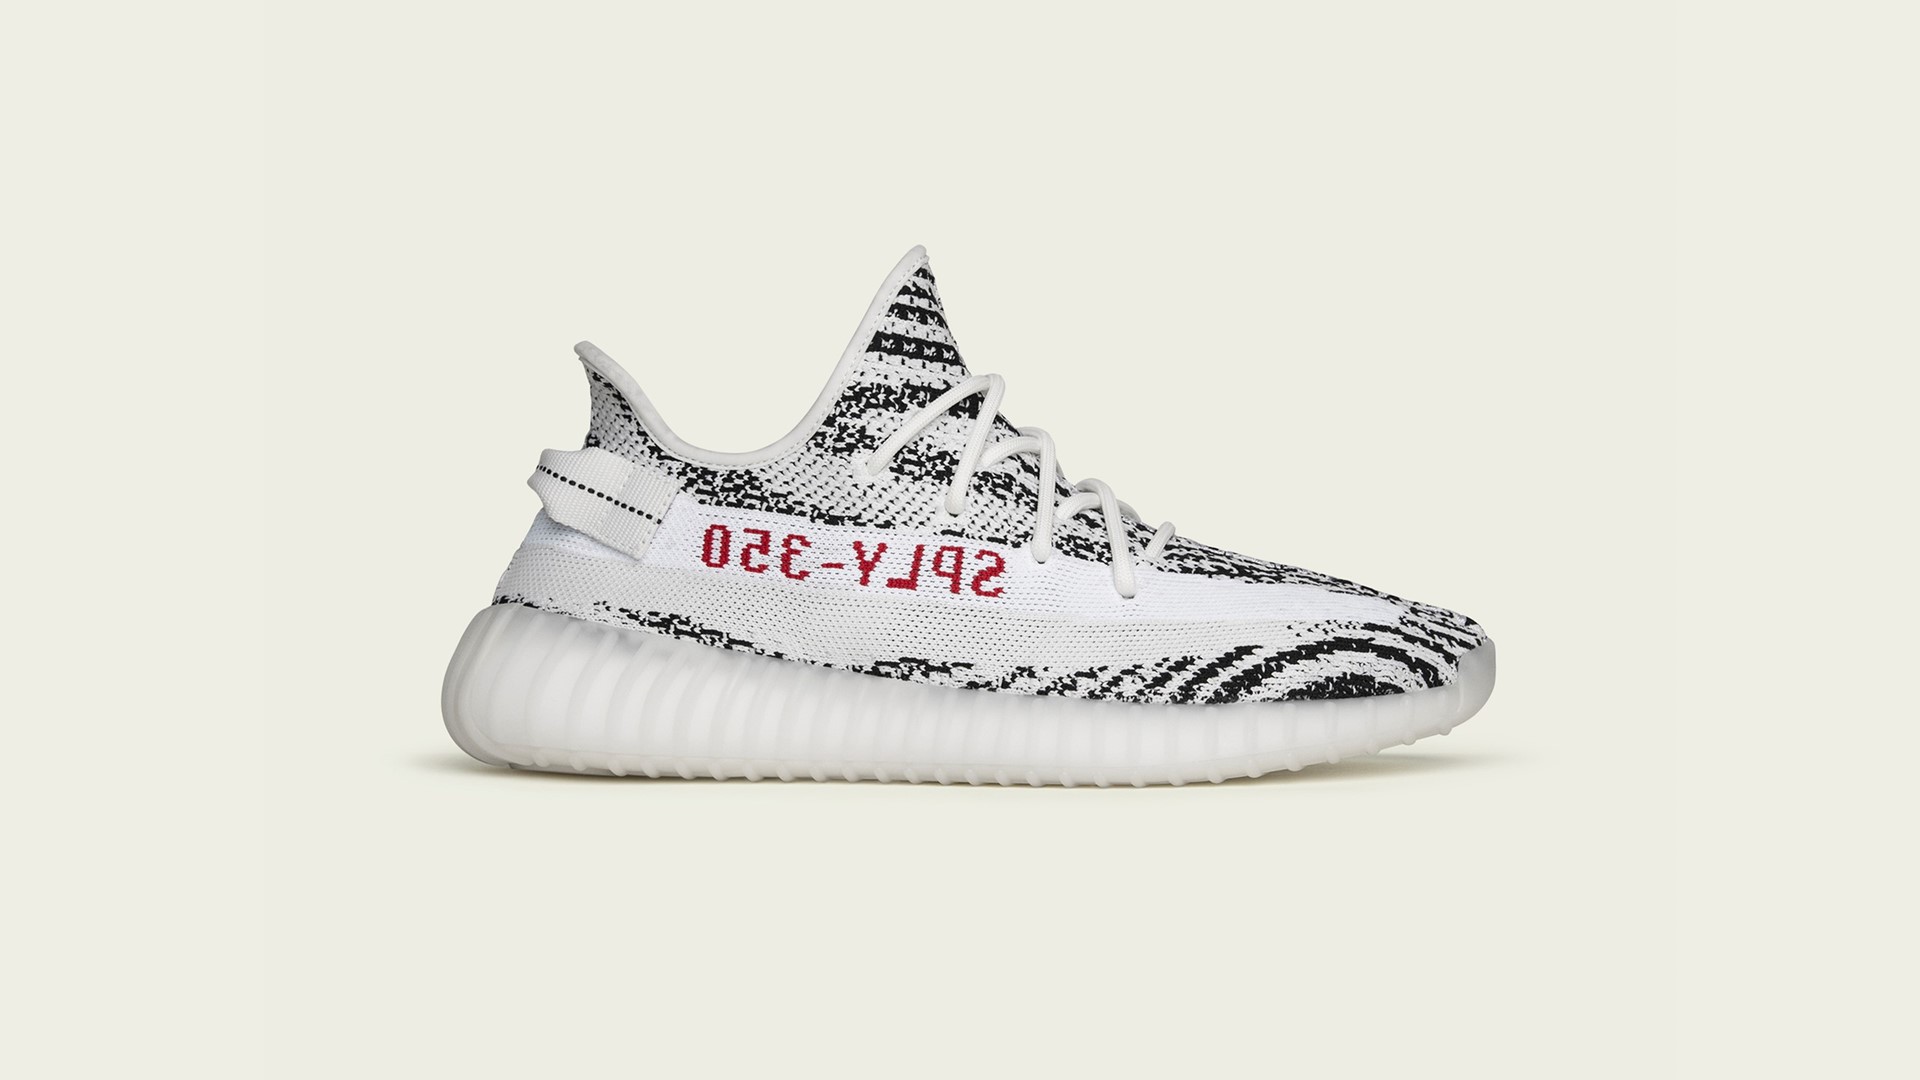 adidas + KANYE WEST announce the YEEZY BOOST 350 V2 White/Core Black/Red